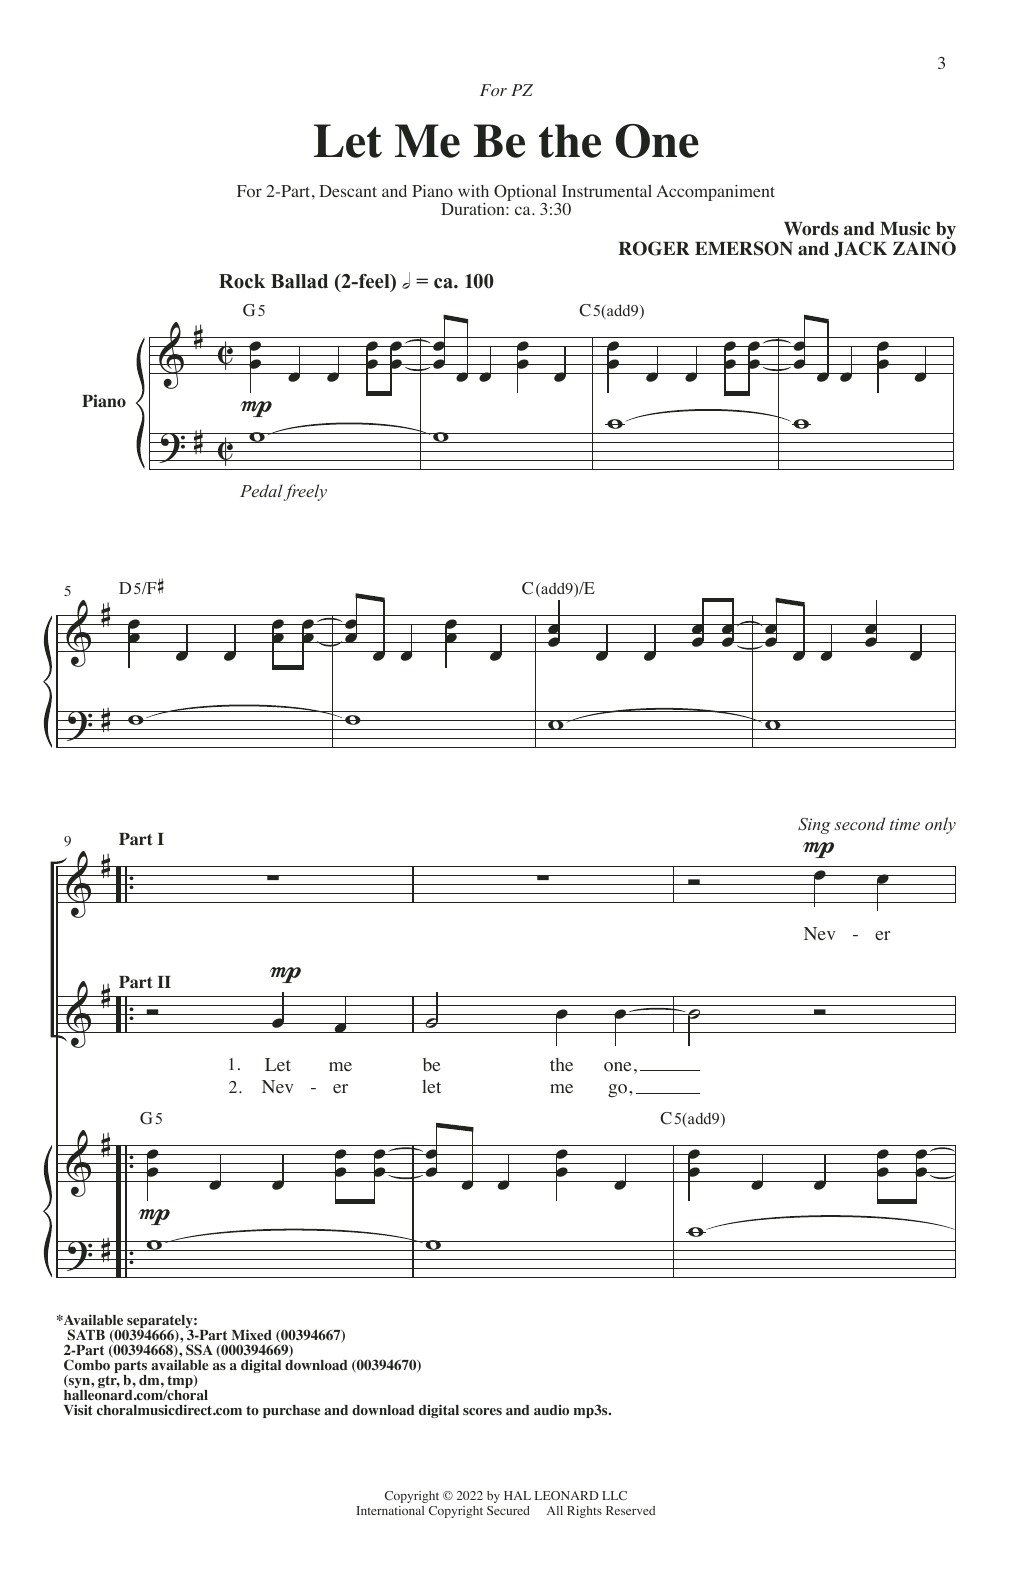 Download Roger Emerson & Jack Zaino Let Me Be The One Sheet Music